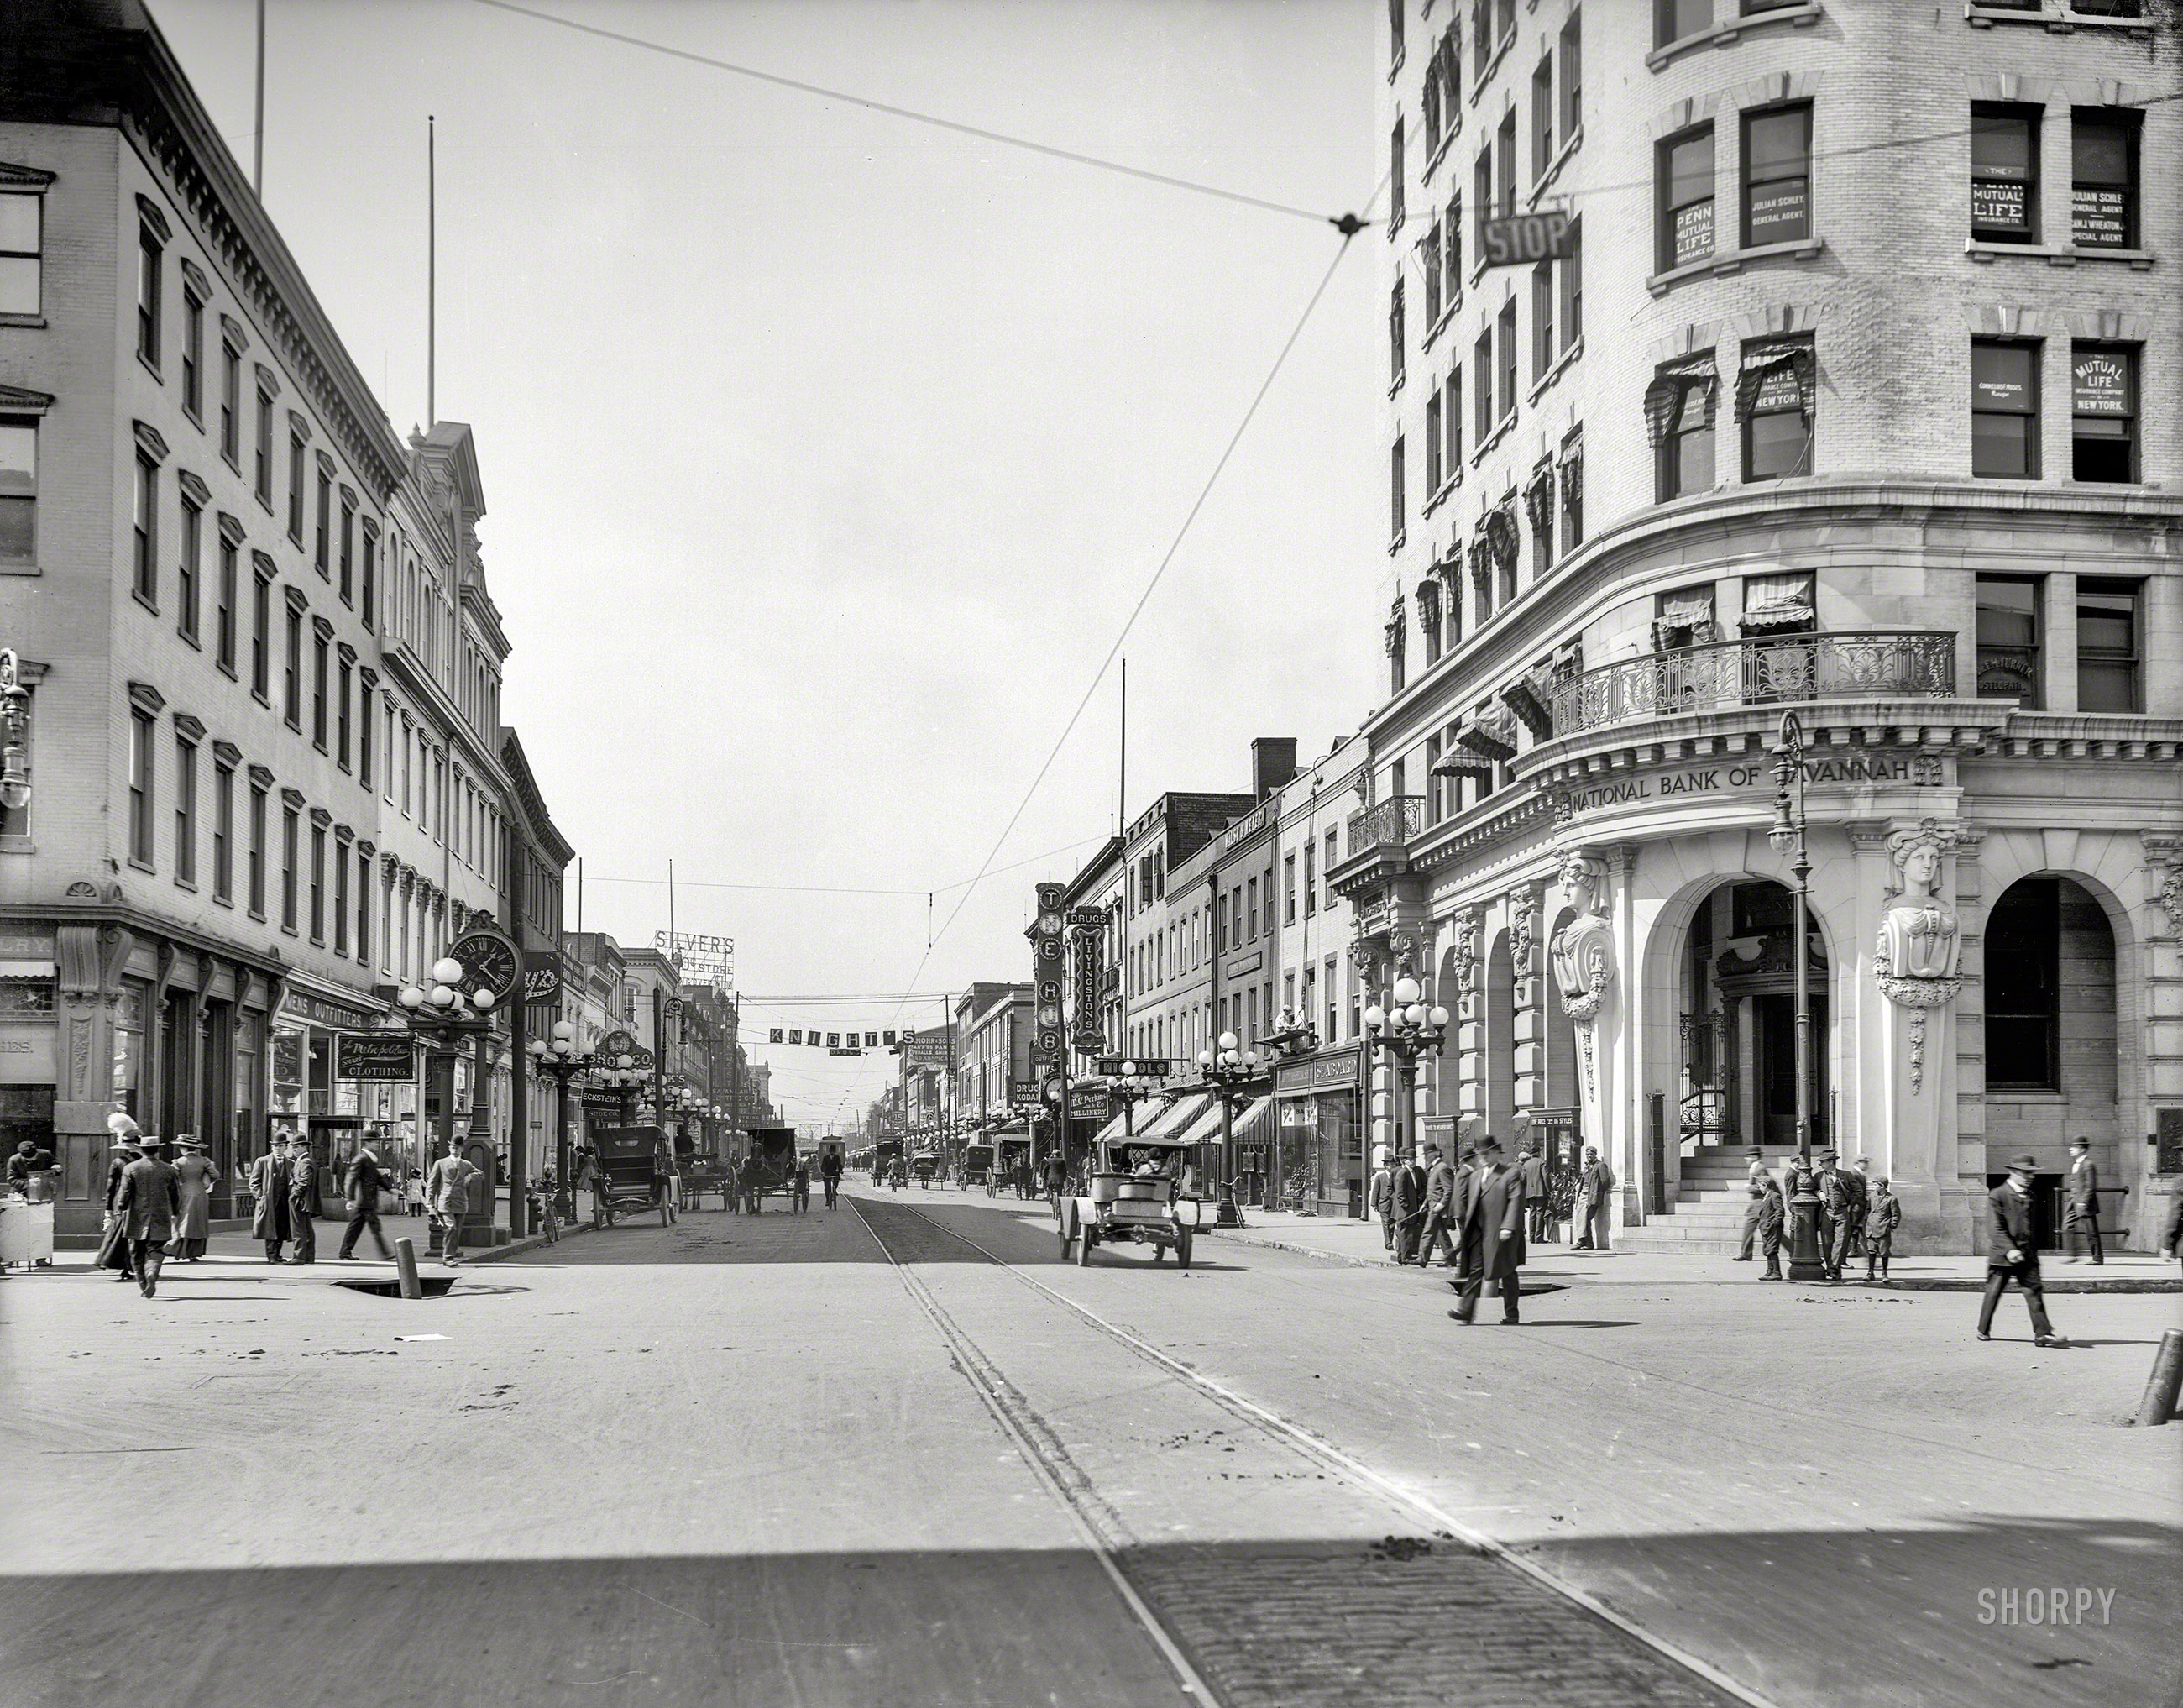 Savannah, Georgia, circa 1907. "Broughton Street from Bull." A slightly different perspective on the scene glimpsed here. 8x10 glass negative. View full size.